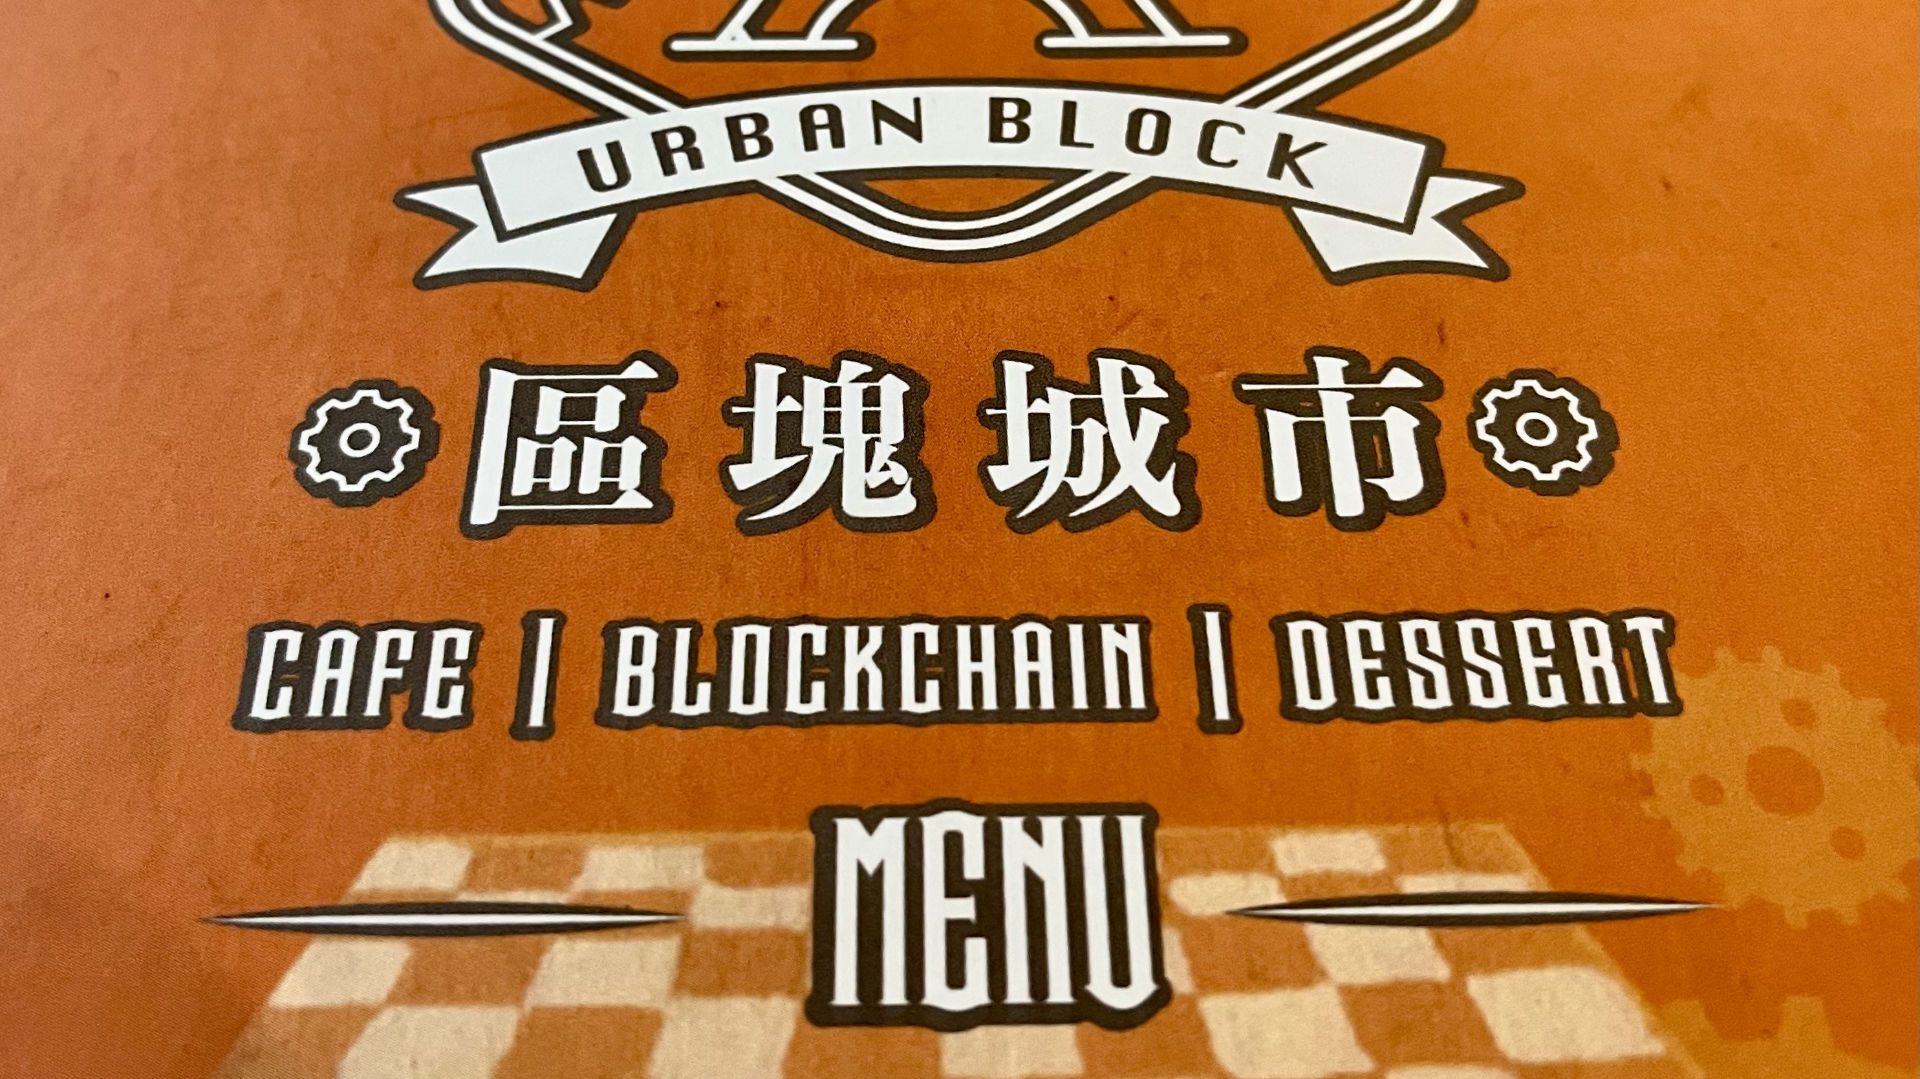 The cover of the menu from Urban Block cafe in Kaohsiung.